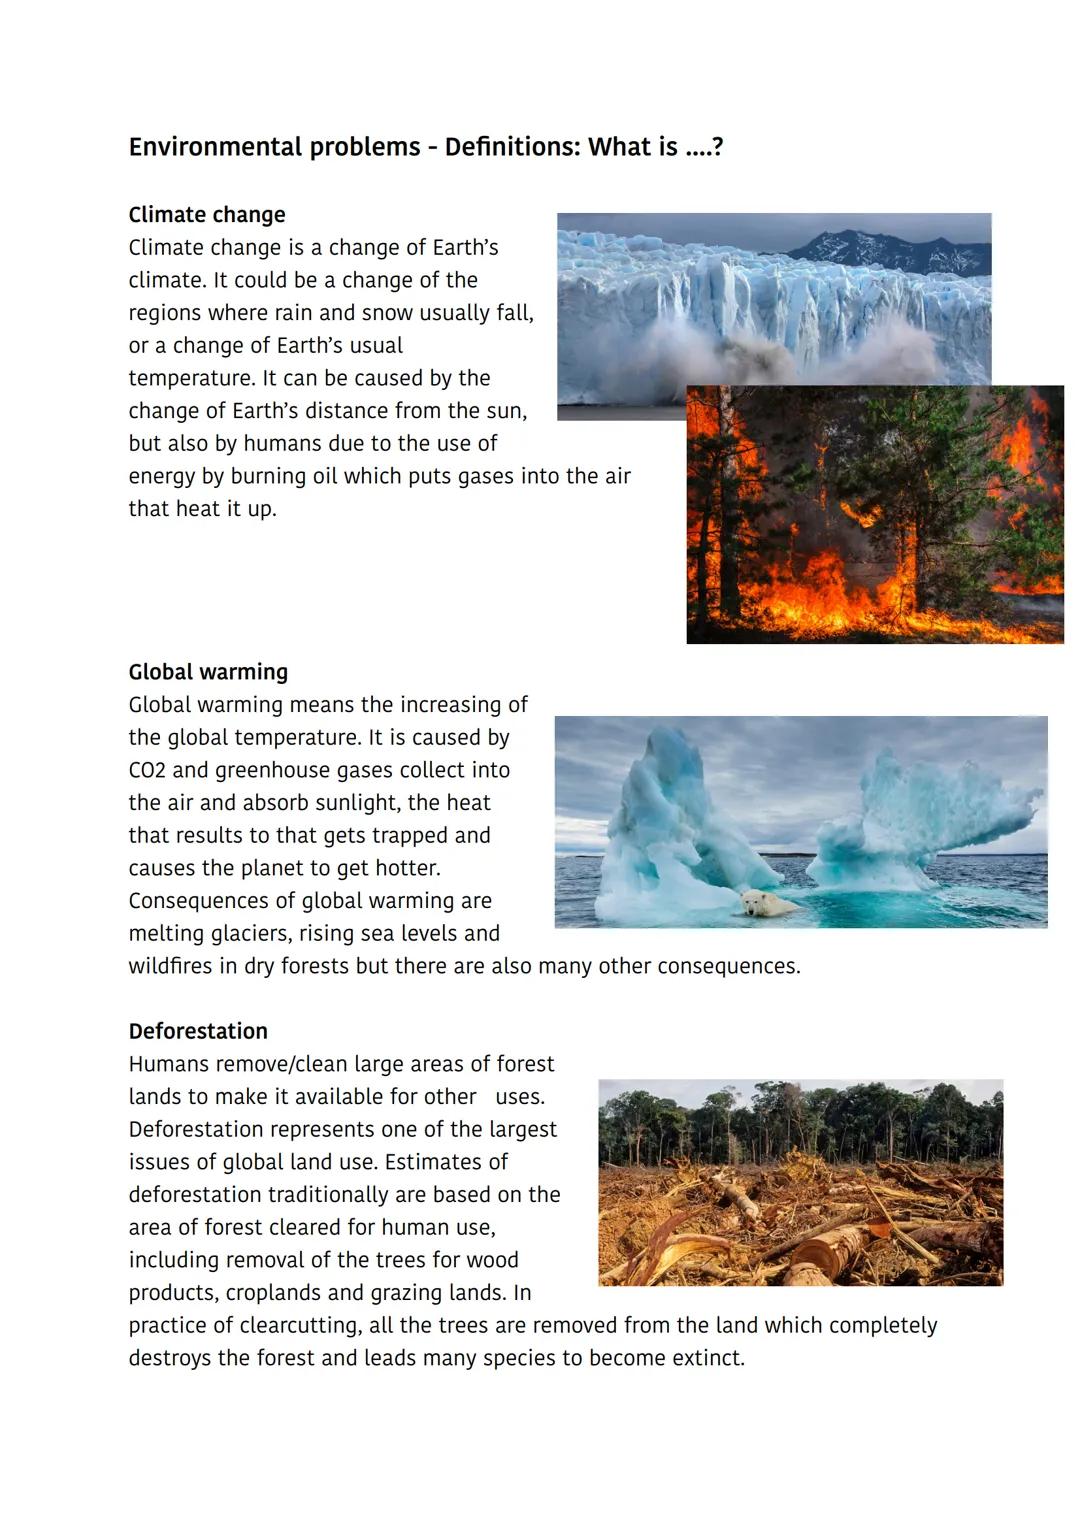 Environmental problems - Definitions: What is ....?
Climate change
Climate change is a change of Earth's
climate. It could be a change of th